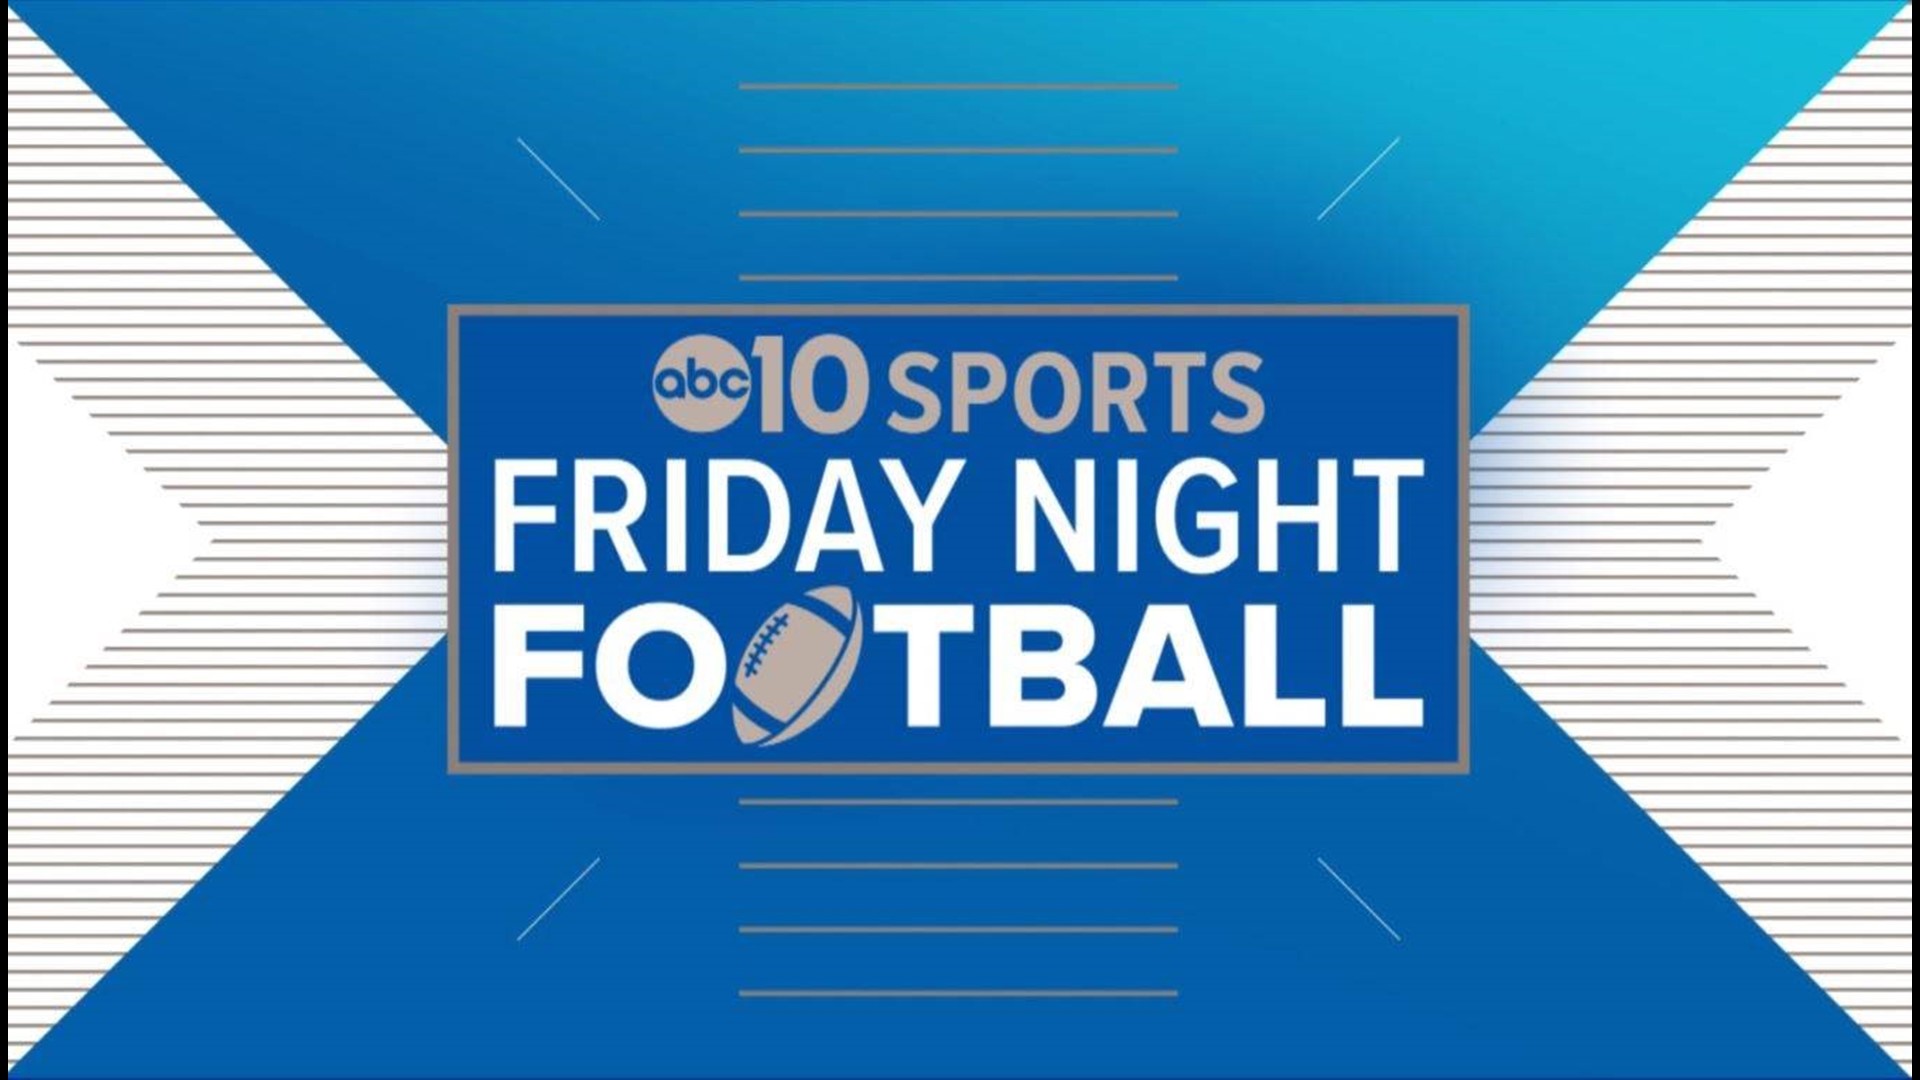 ABC10's Lina Washington and Kevin John bring you the action from the biggest matchups in Week 8 of the high school football season in Northern California.